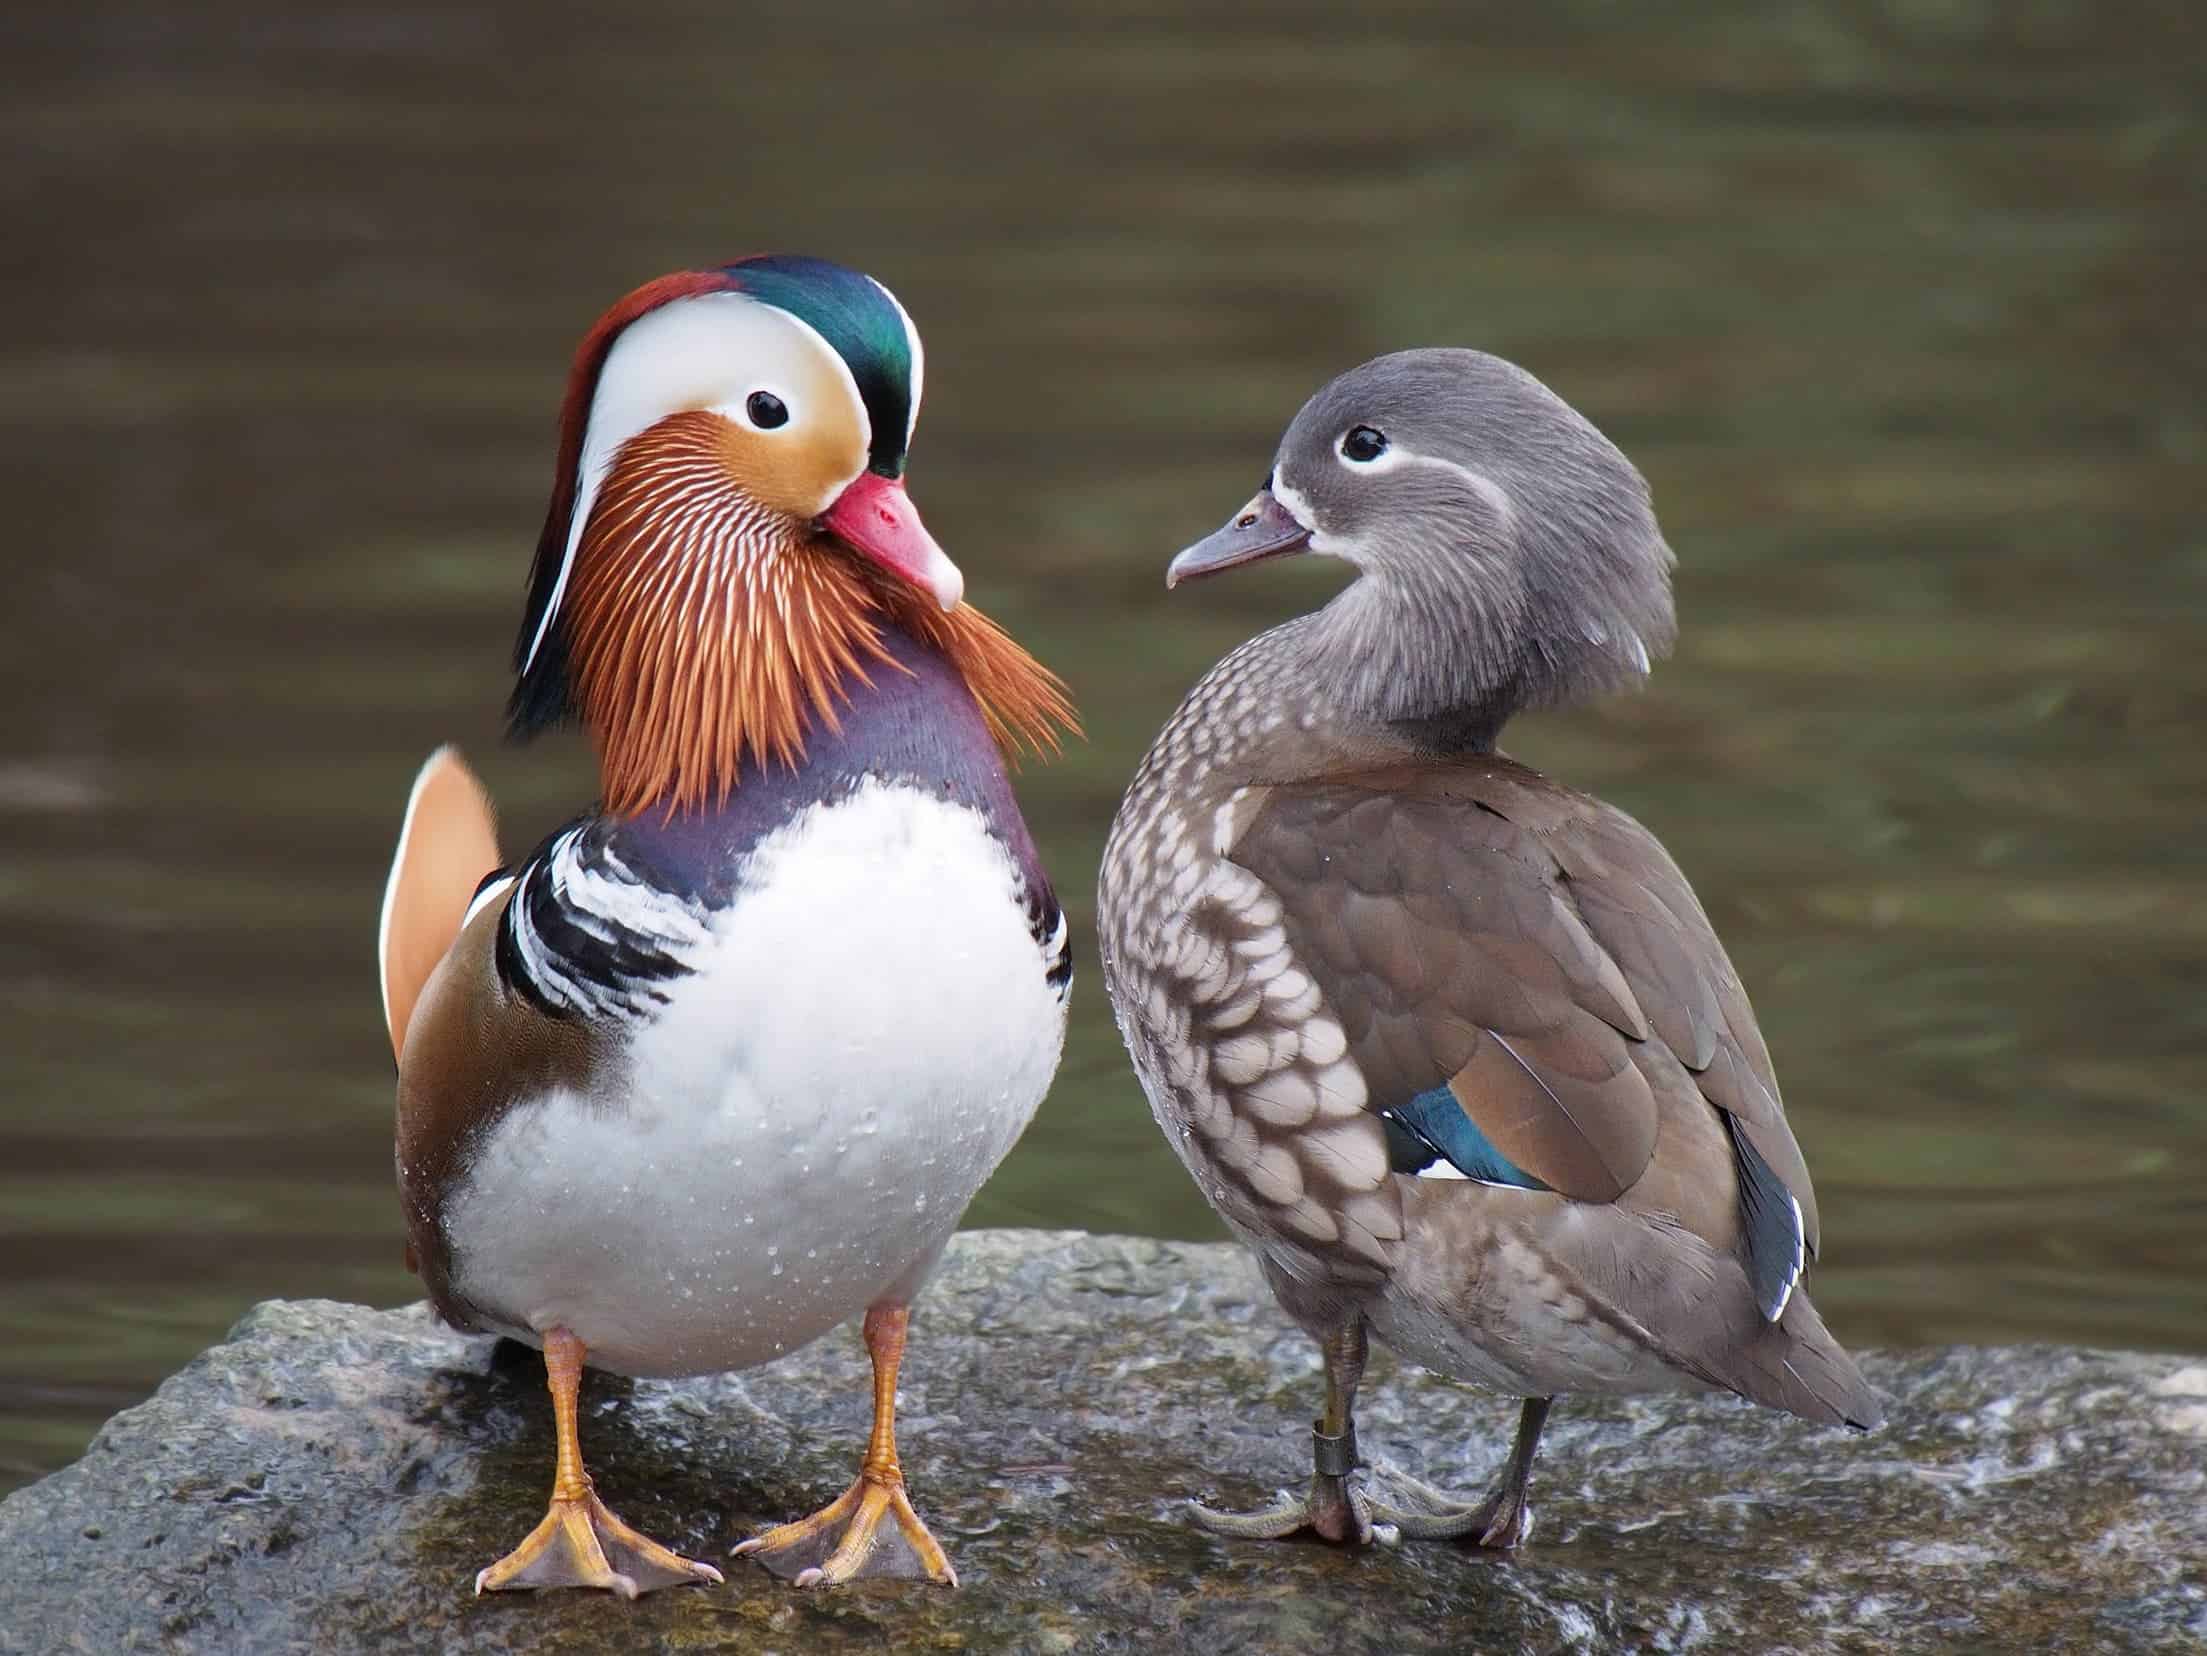 Mandarin ducks, male (left) and female (right), illustrating the dramatic difference between sexes. Credit: Wikimedia Commons.